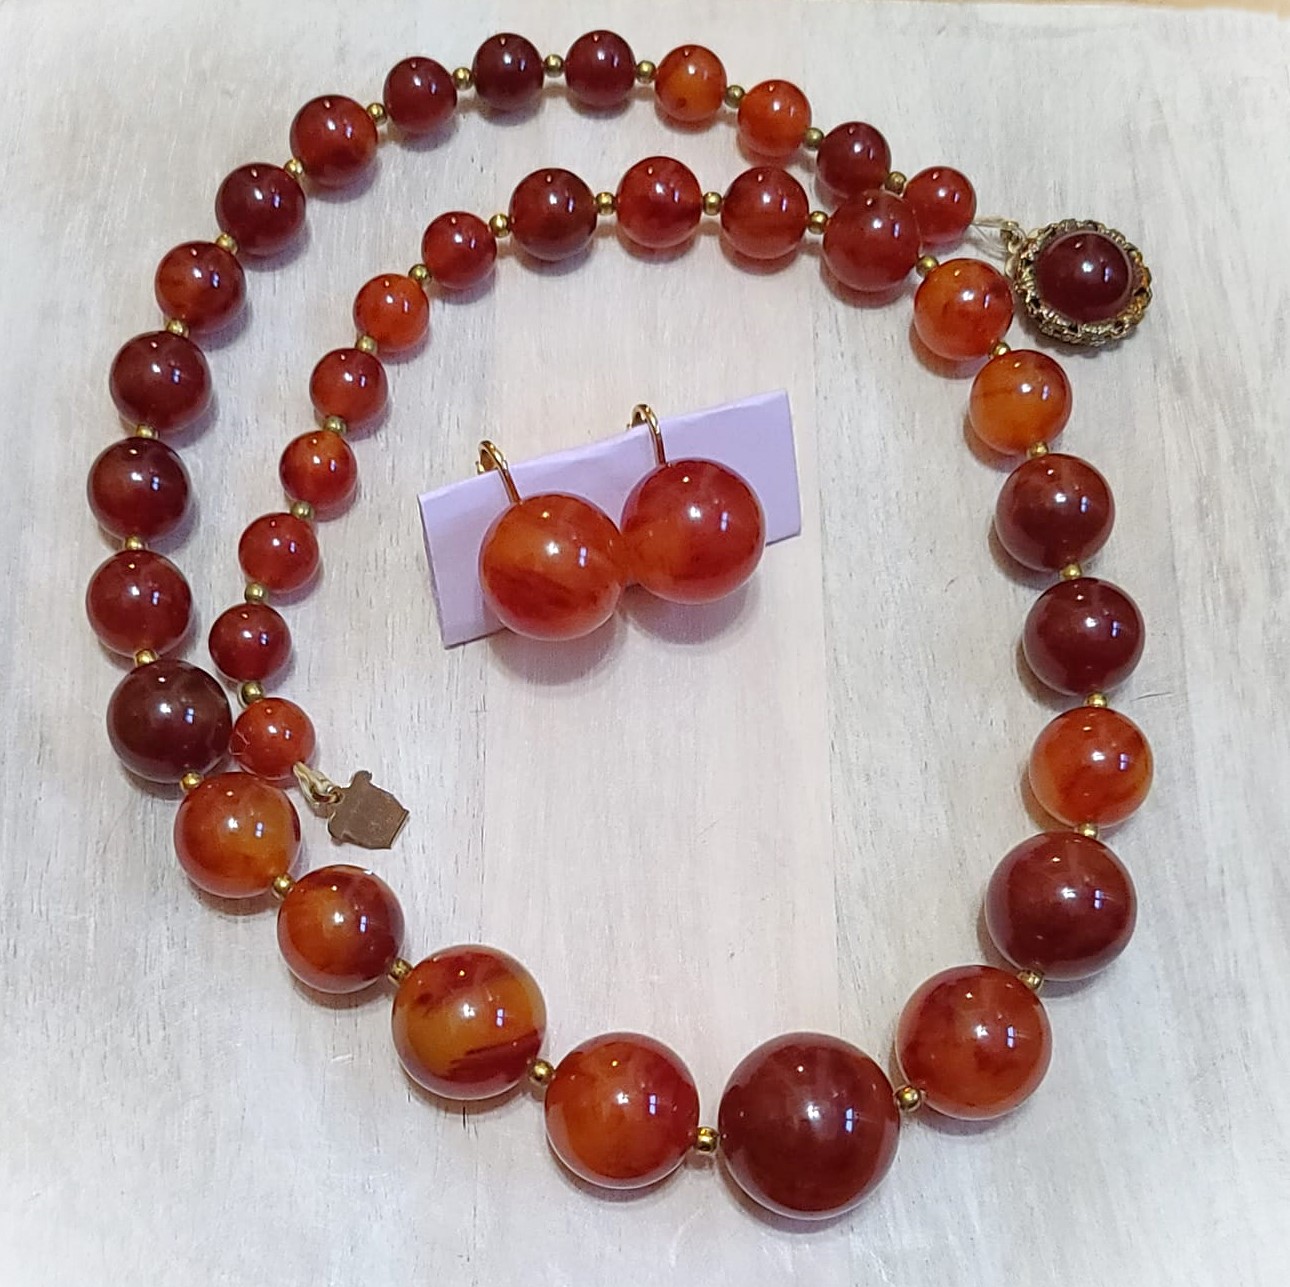 Richelle designer carnelian color beaded necklace and earrings